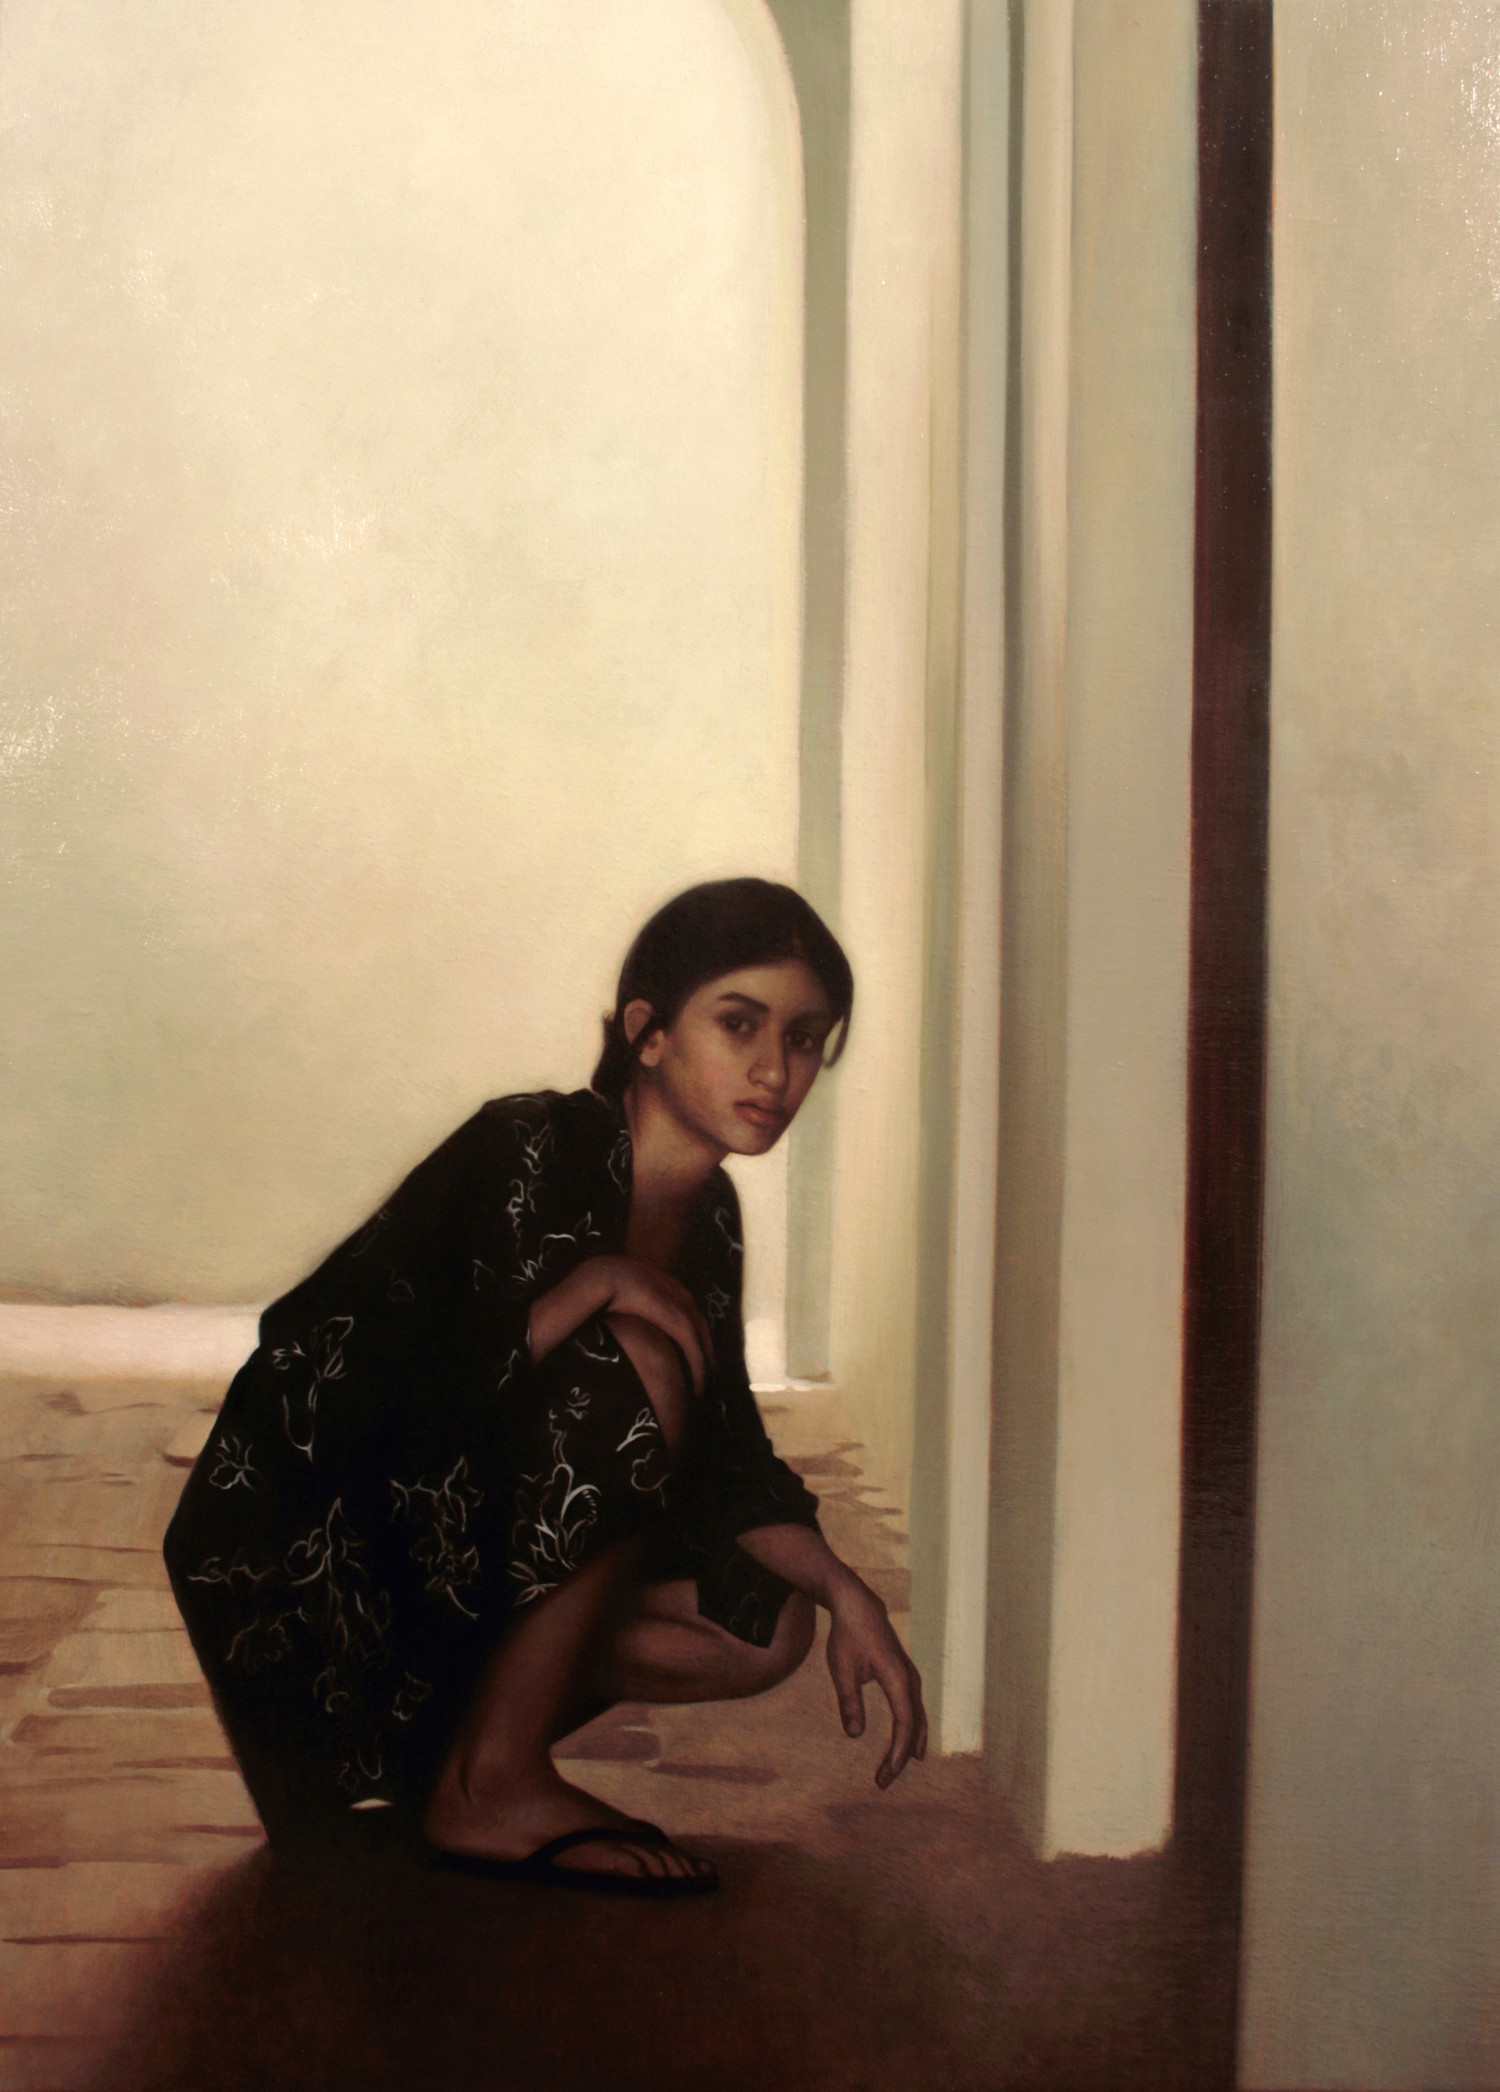   Passage , 2009, Oil on linen, 30 x 22 inches, Private collection 